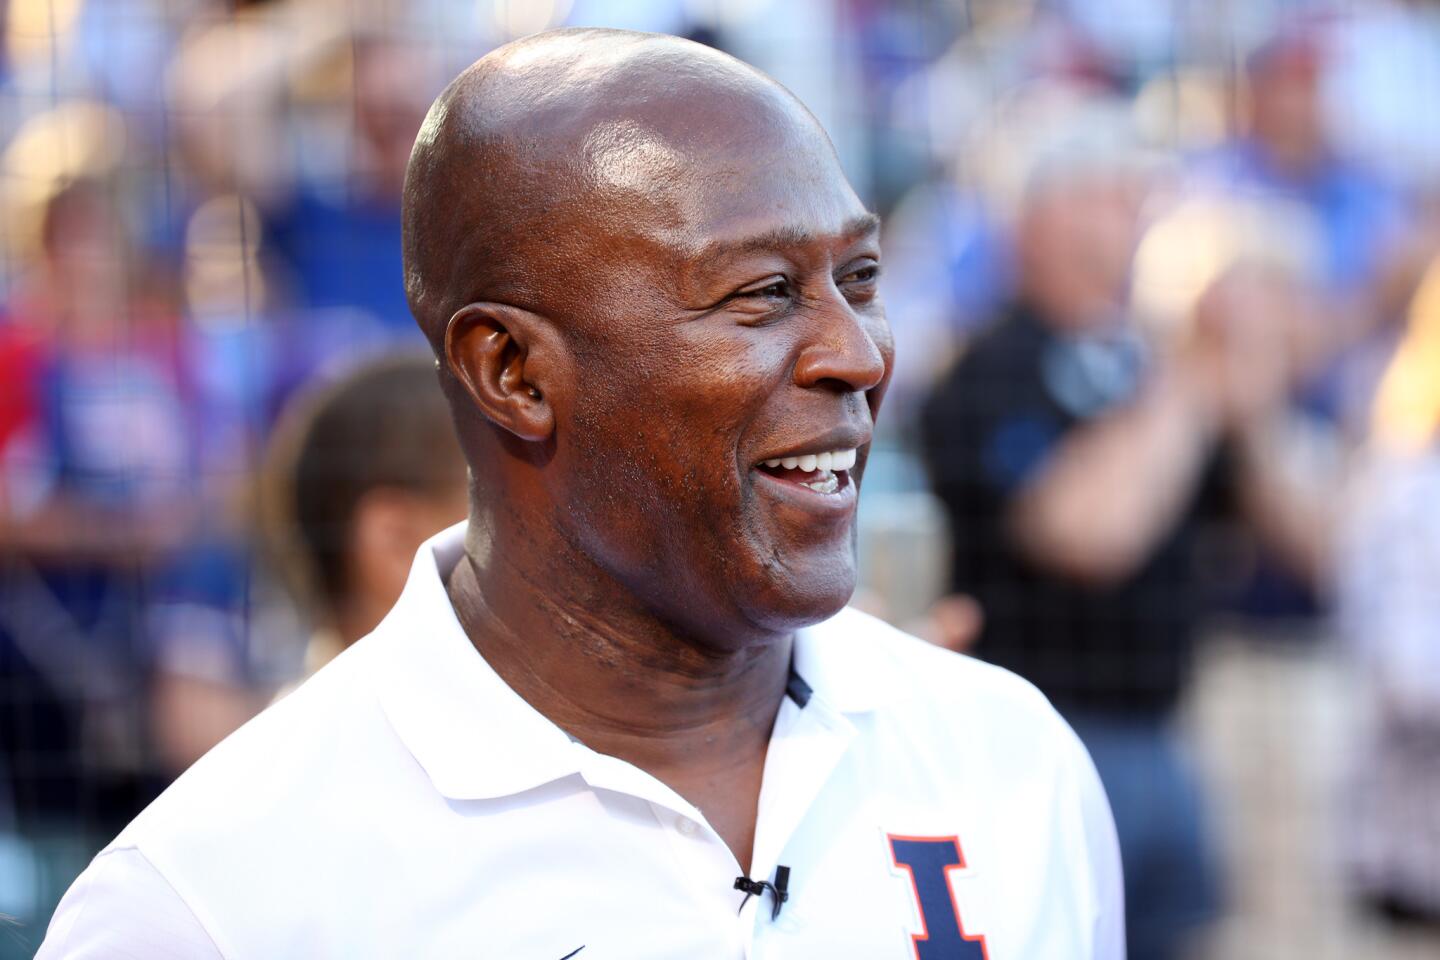 Illini football coach Lovie Smith smiles before a Cubs-Cardinals game at Wrigley Field on July 23, 2017.